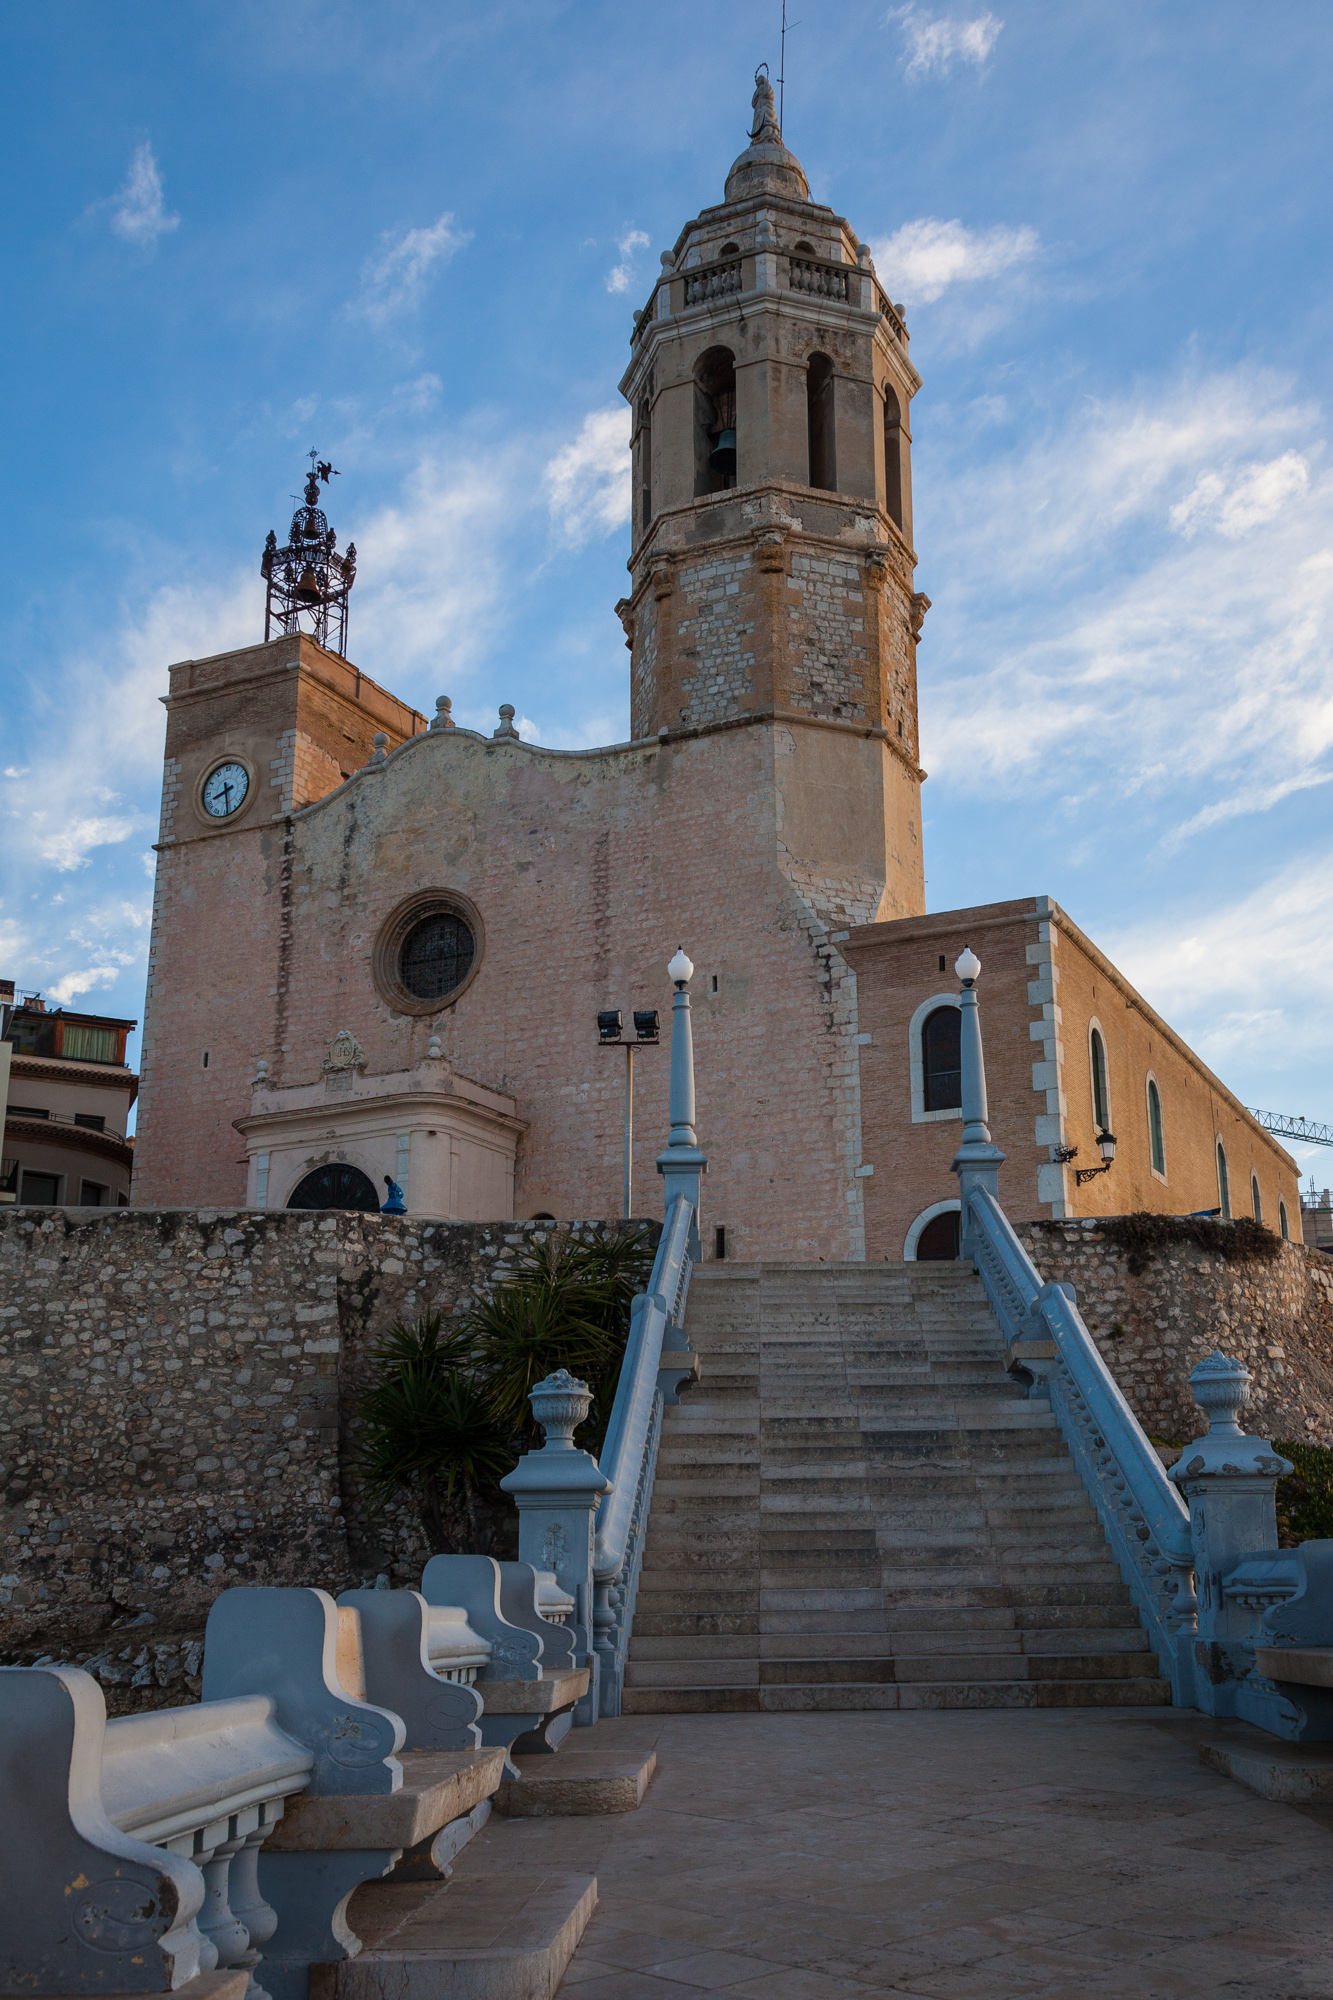 A quieter early morning view of the Church of Sant Bartomeu.